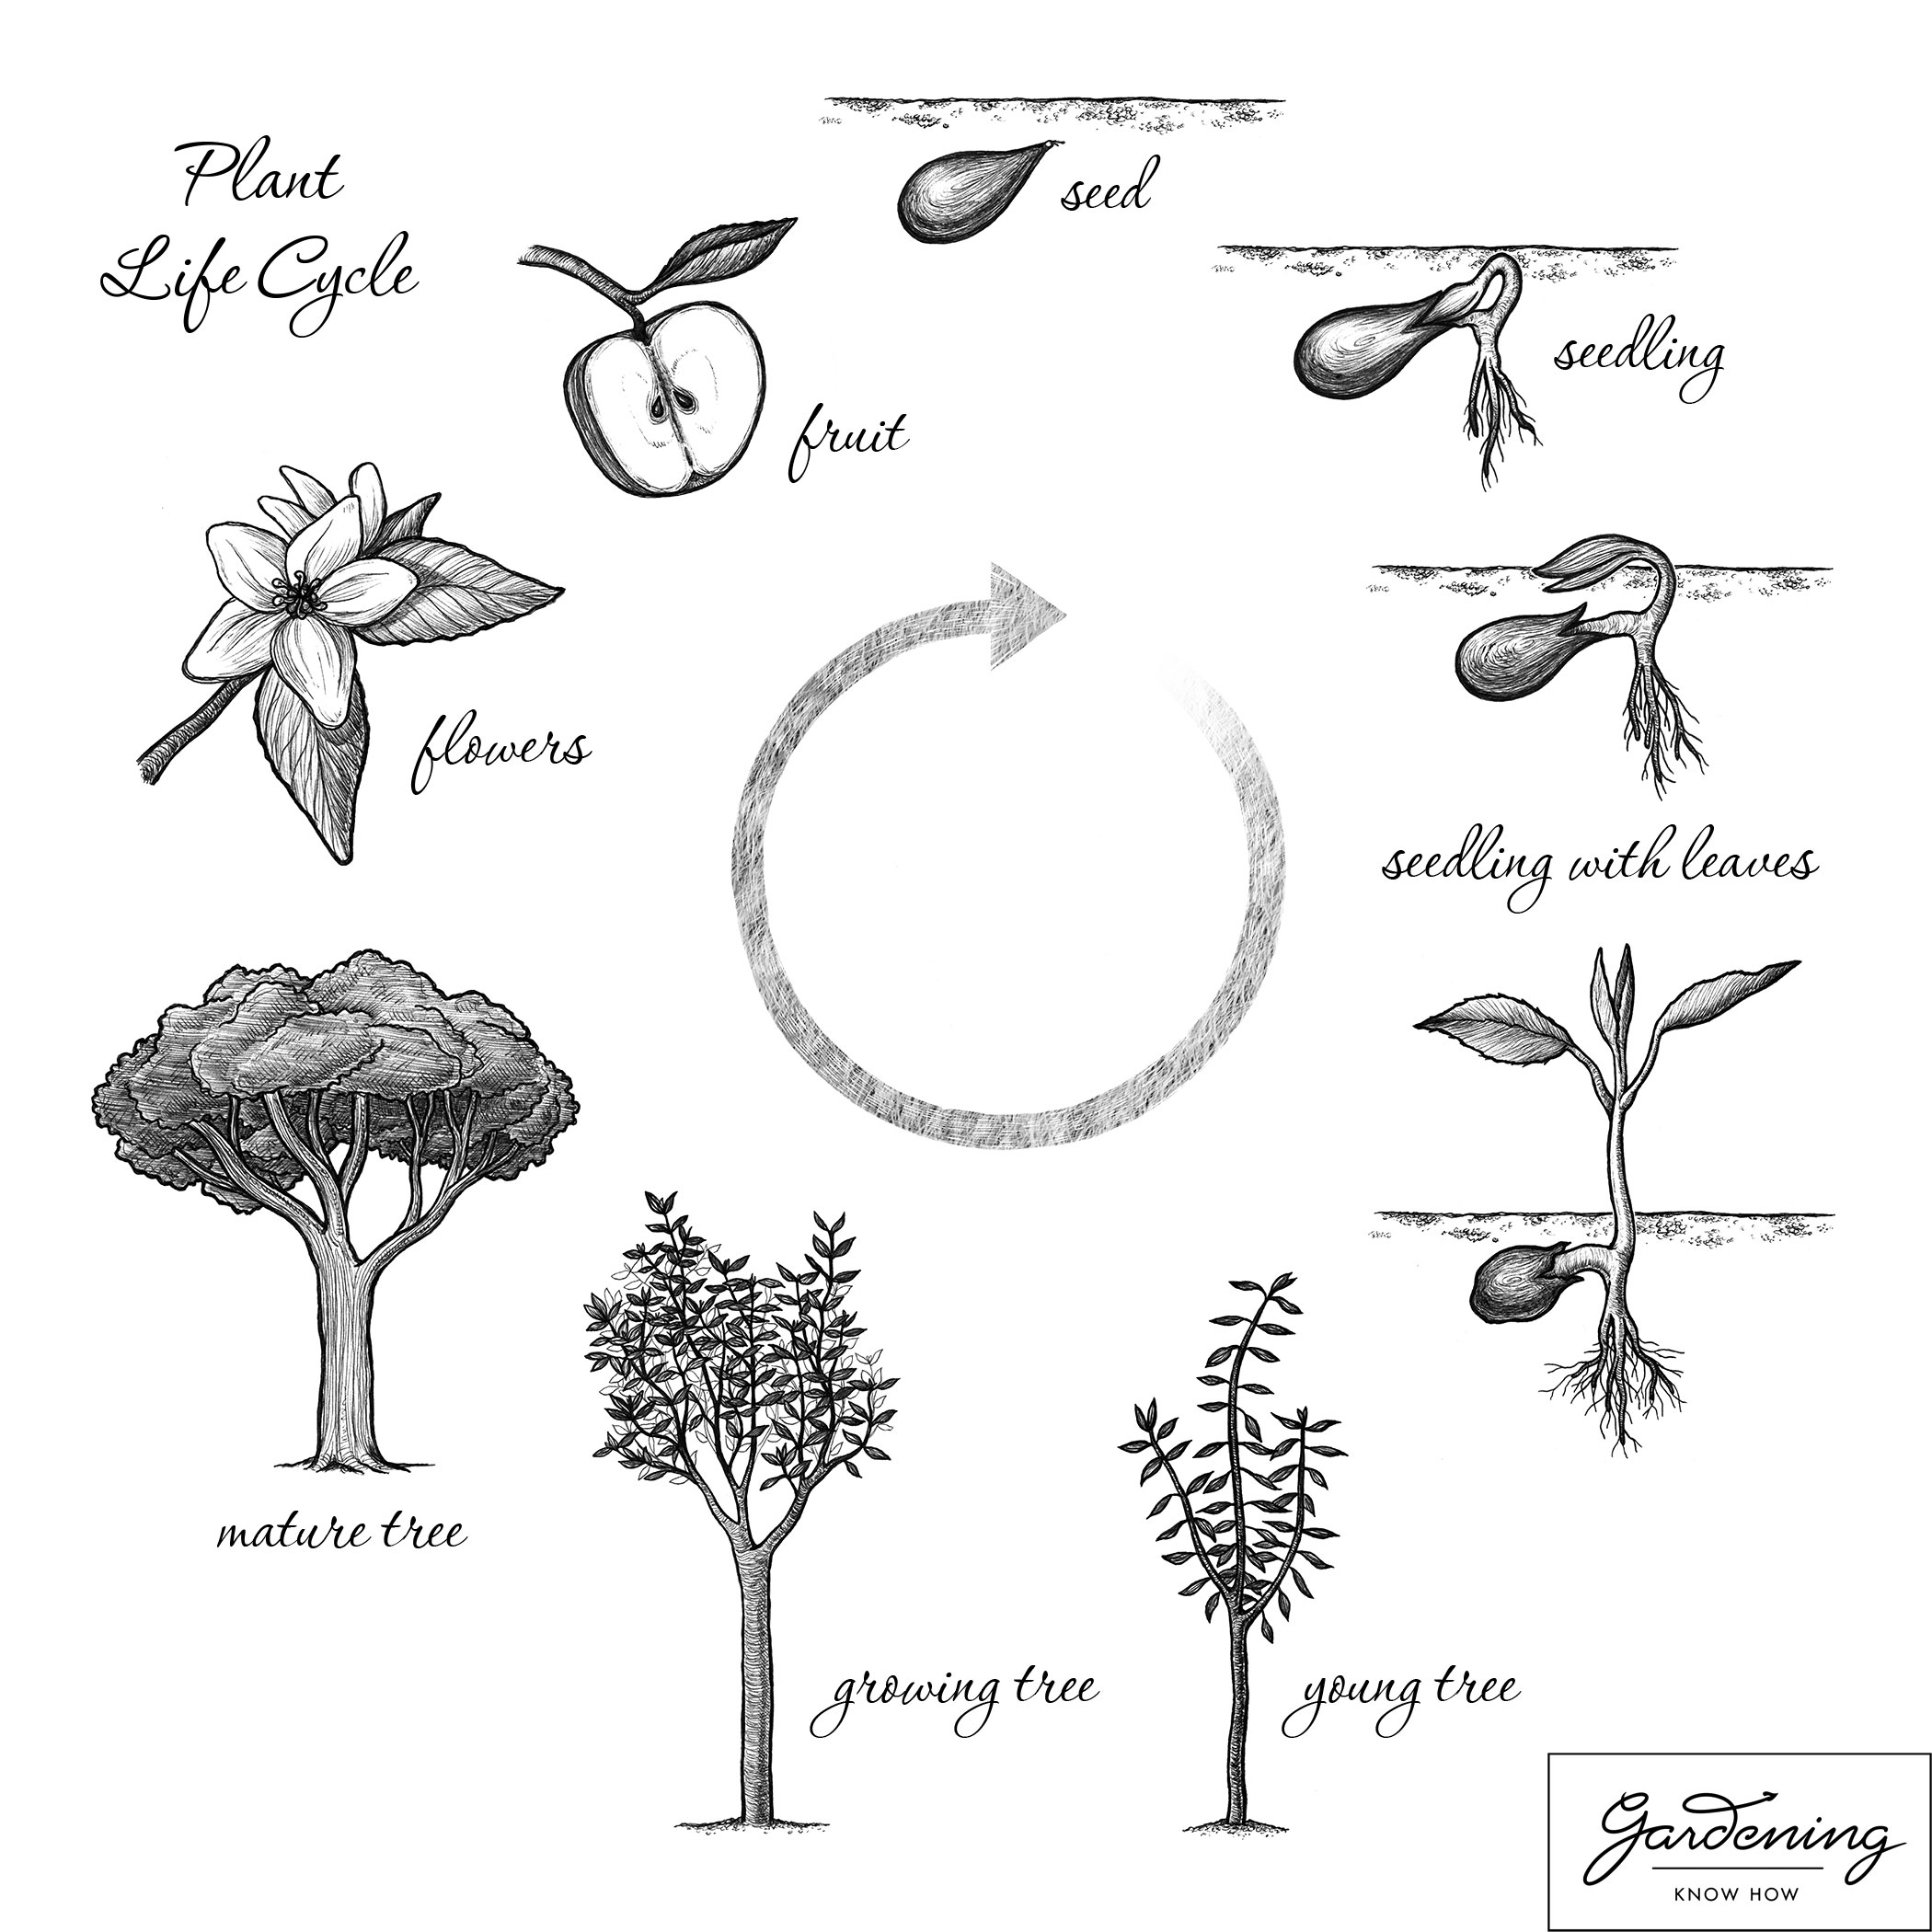 15 Best Images of Seed And Plant Worksheets - Plant Life Cycle Seed